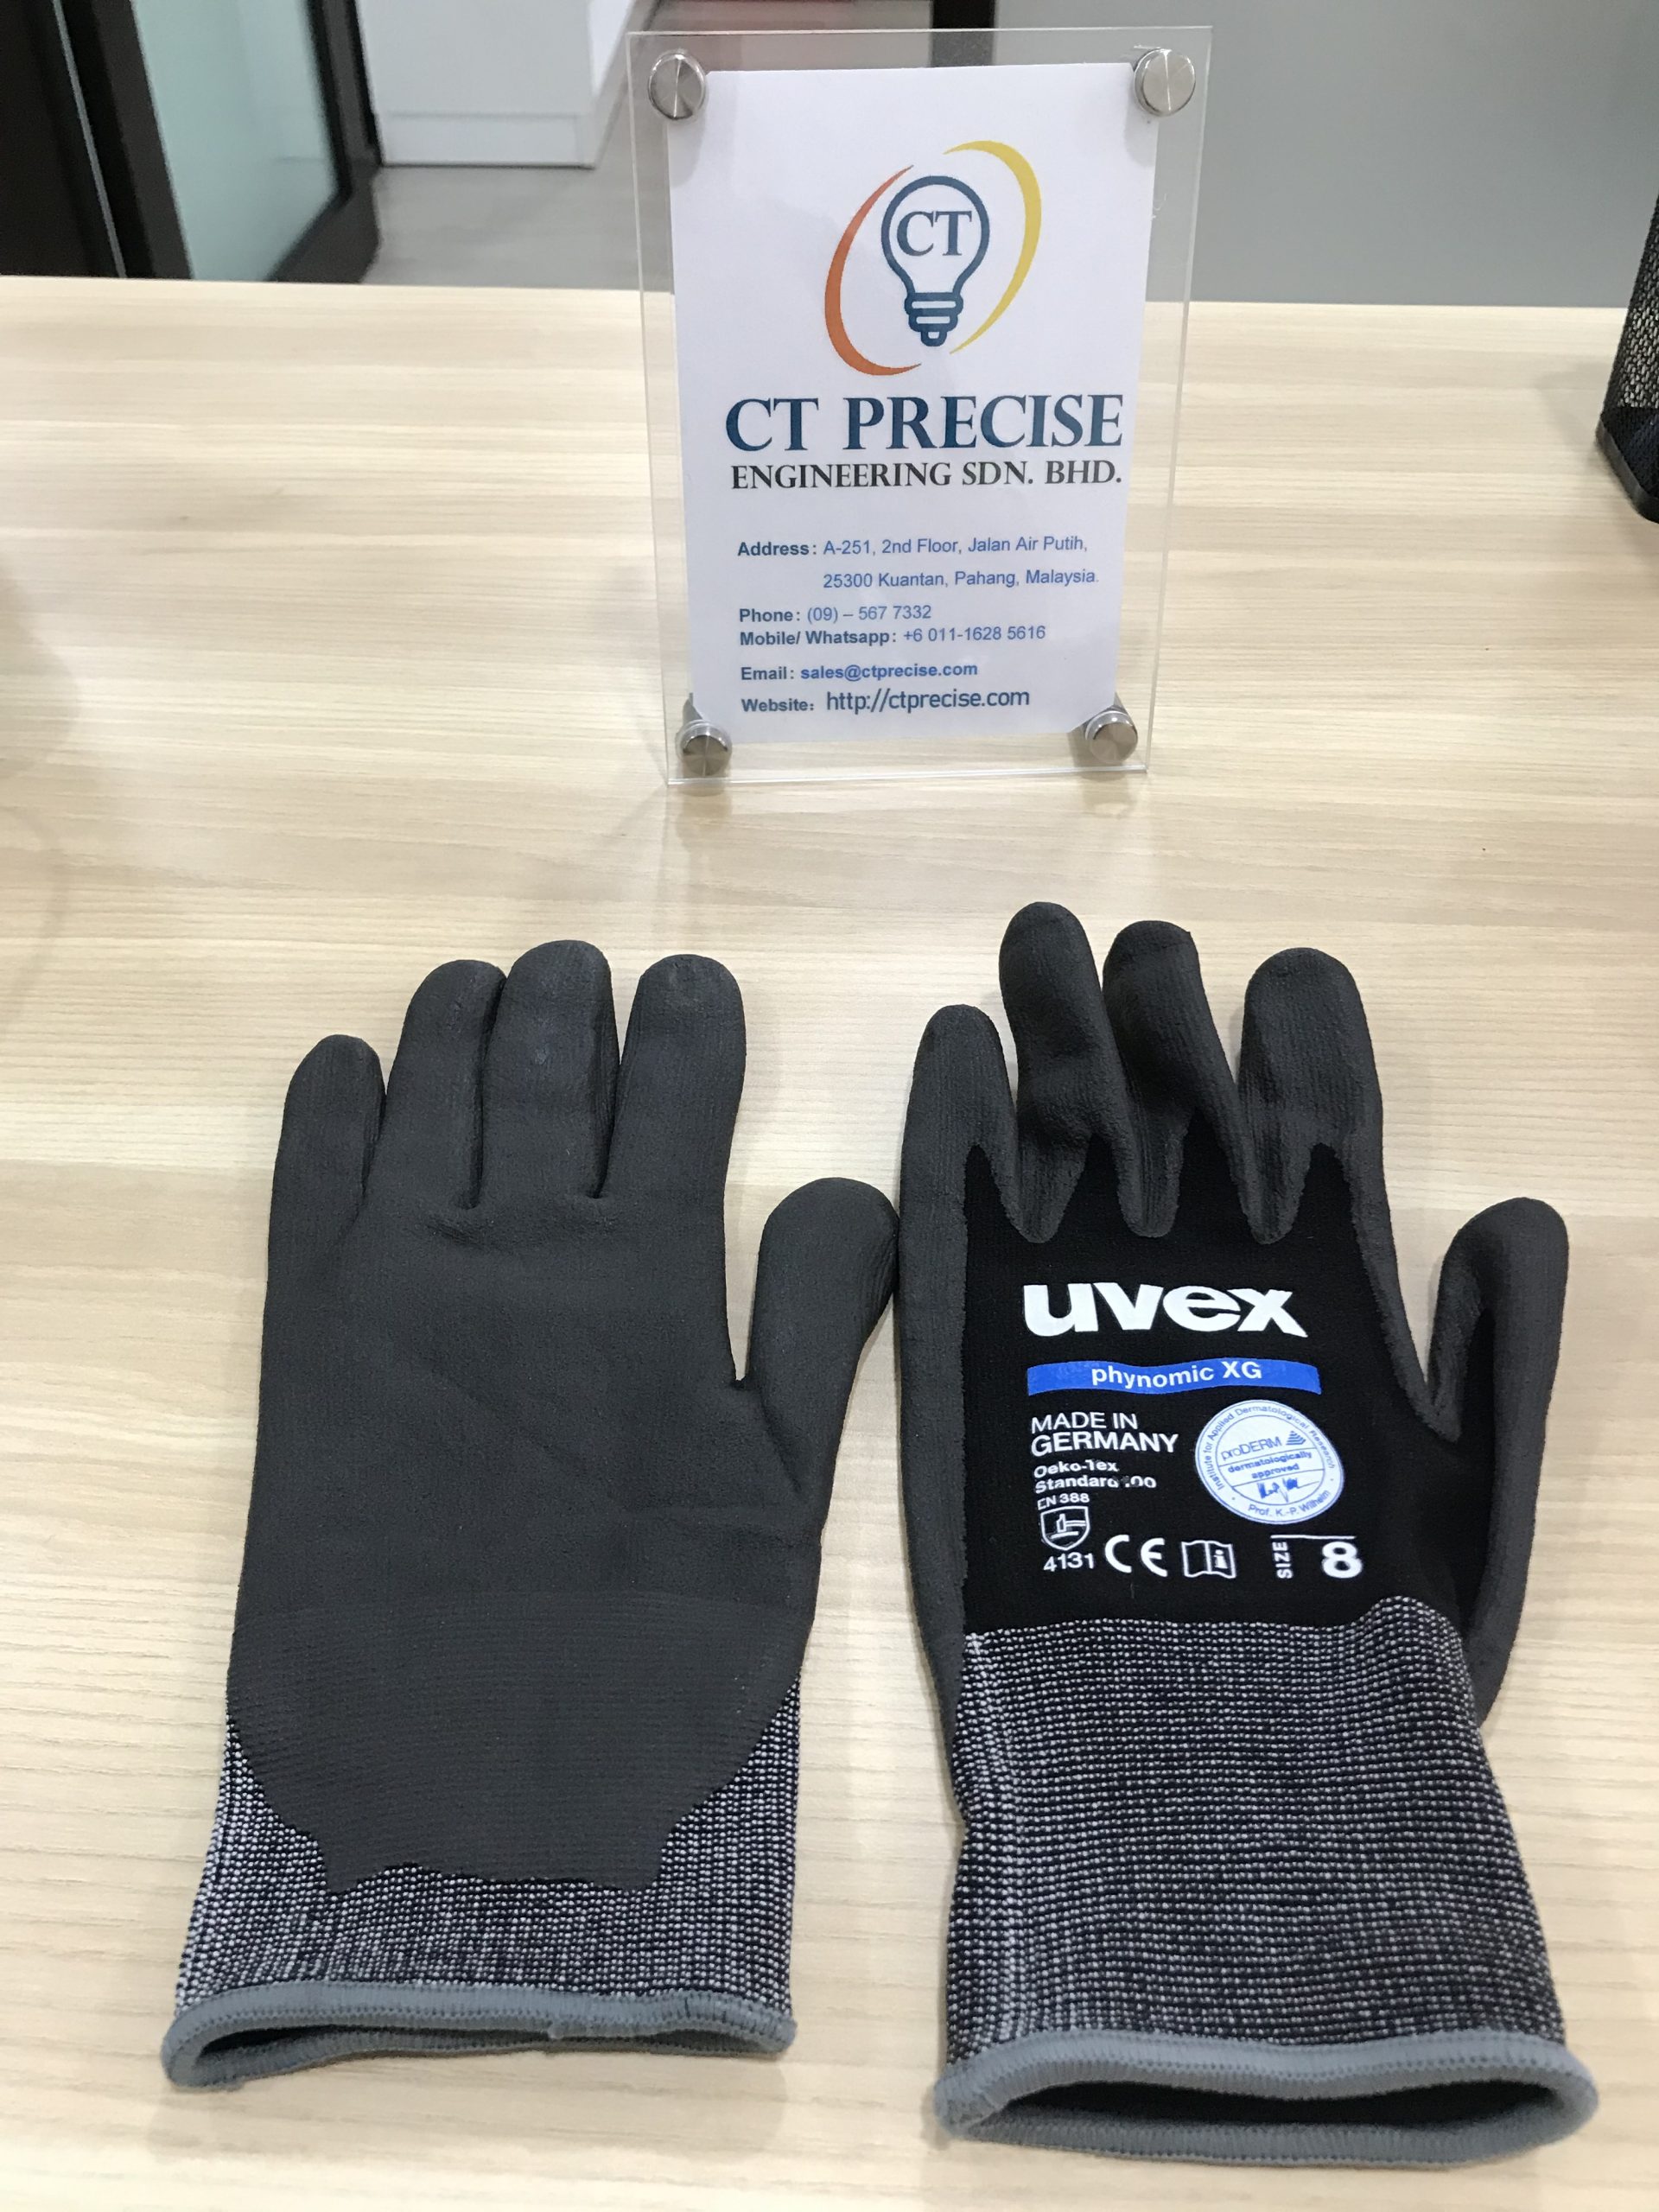 6 Pairs Uvex Work Gloves Phynomic XG Safety Precision Assembly/Handling Gloves 